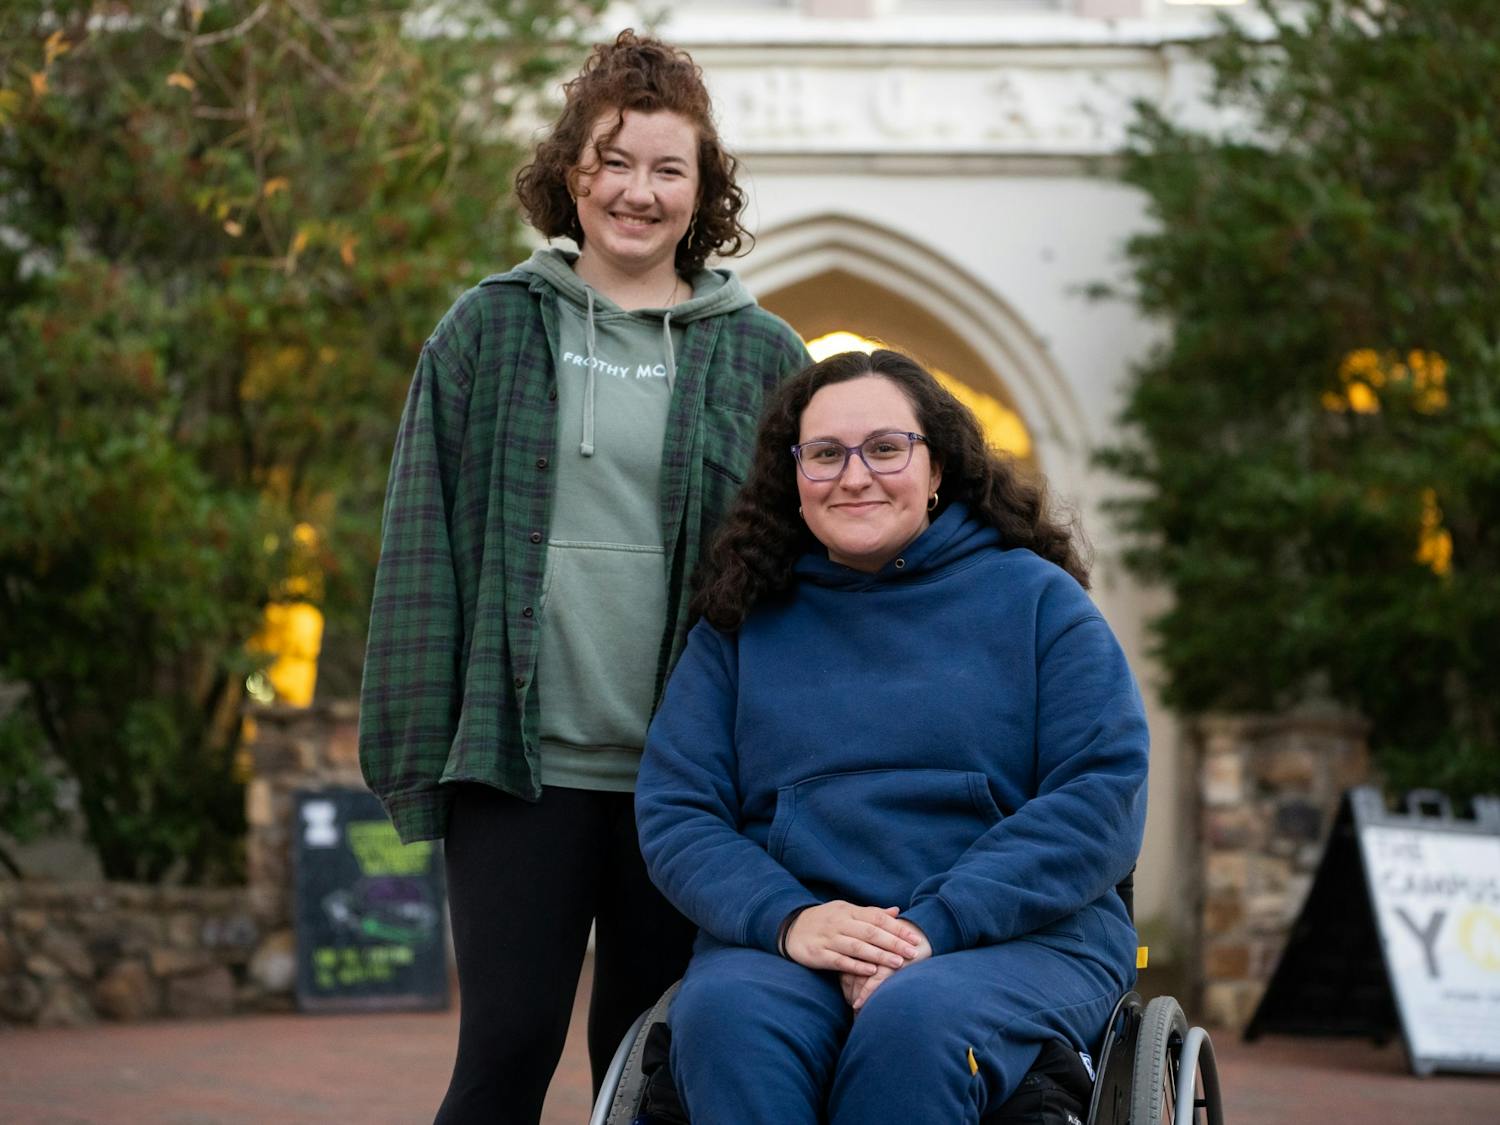 UNC senior Megan Murphy and sophomore Laura Saavedra Forero, the co-presidents of the Campus Y, pose in front of the Campus Y building on Monday, Nov. 14, 2022.